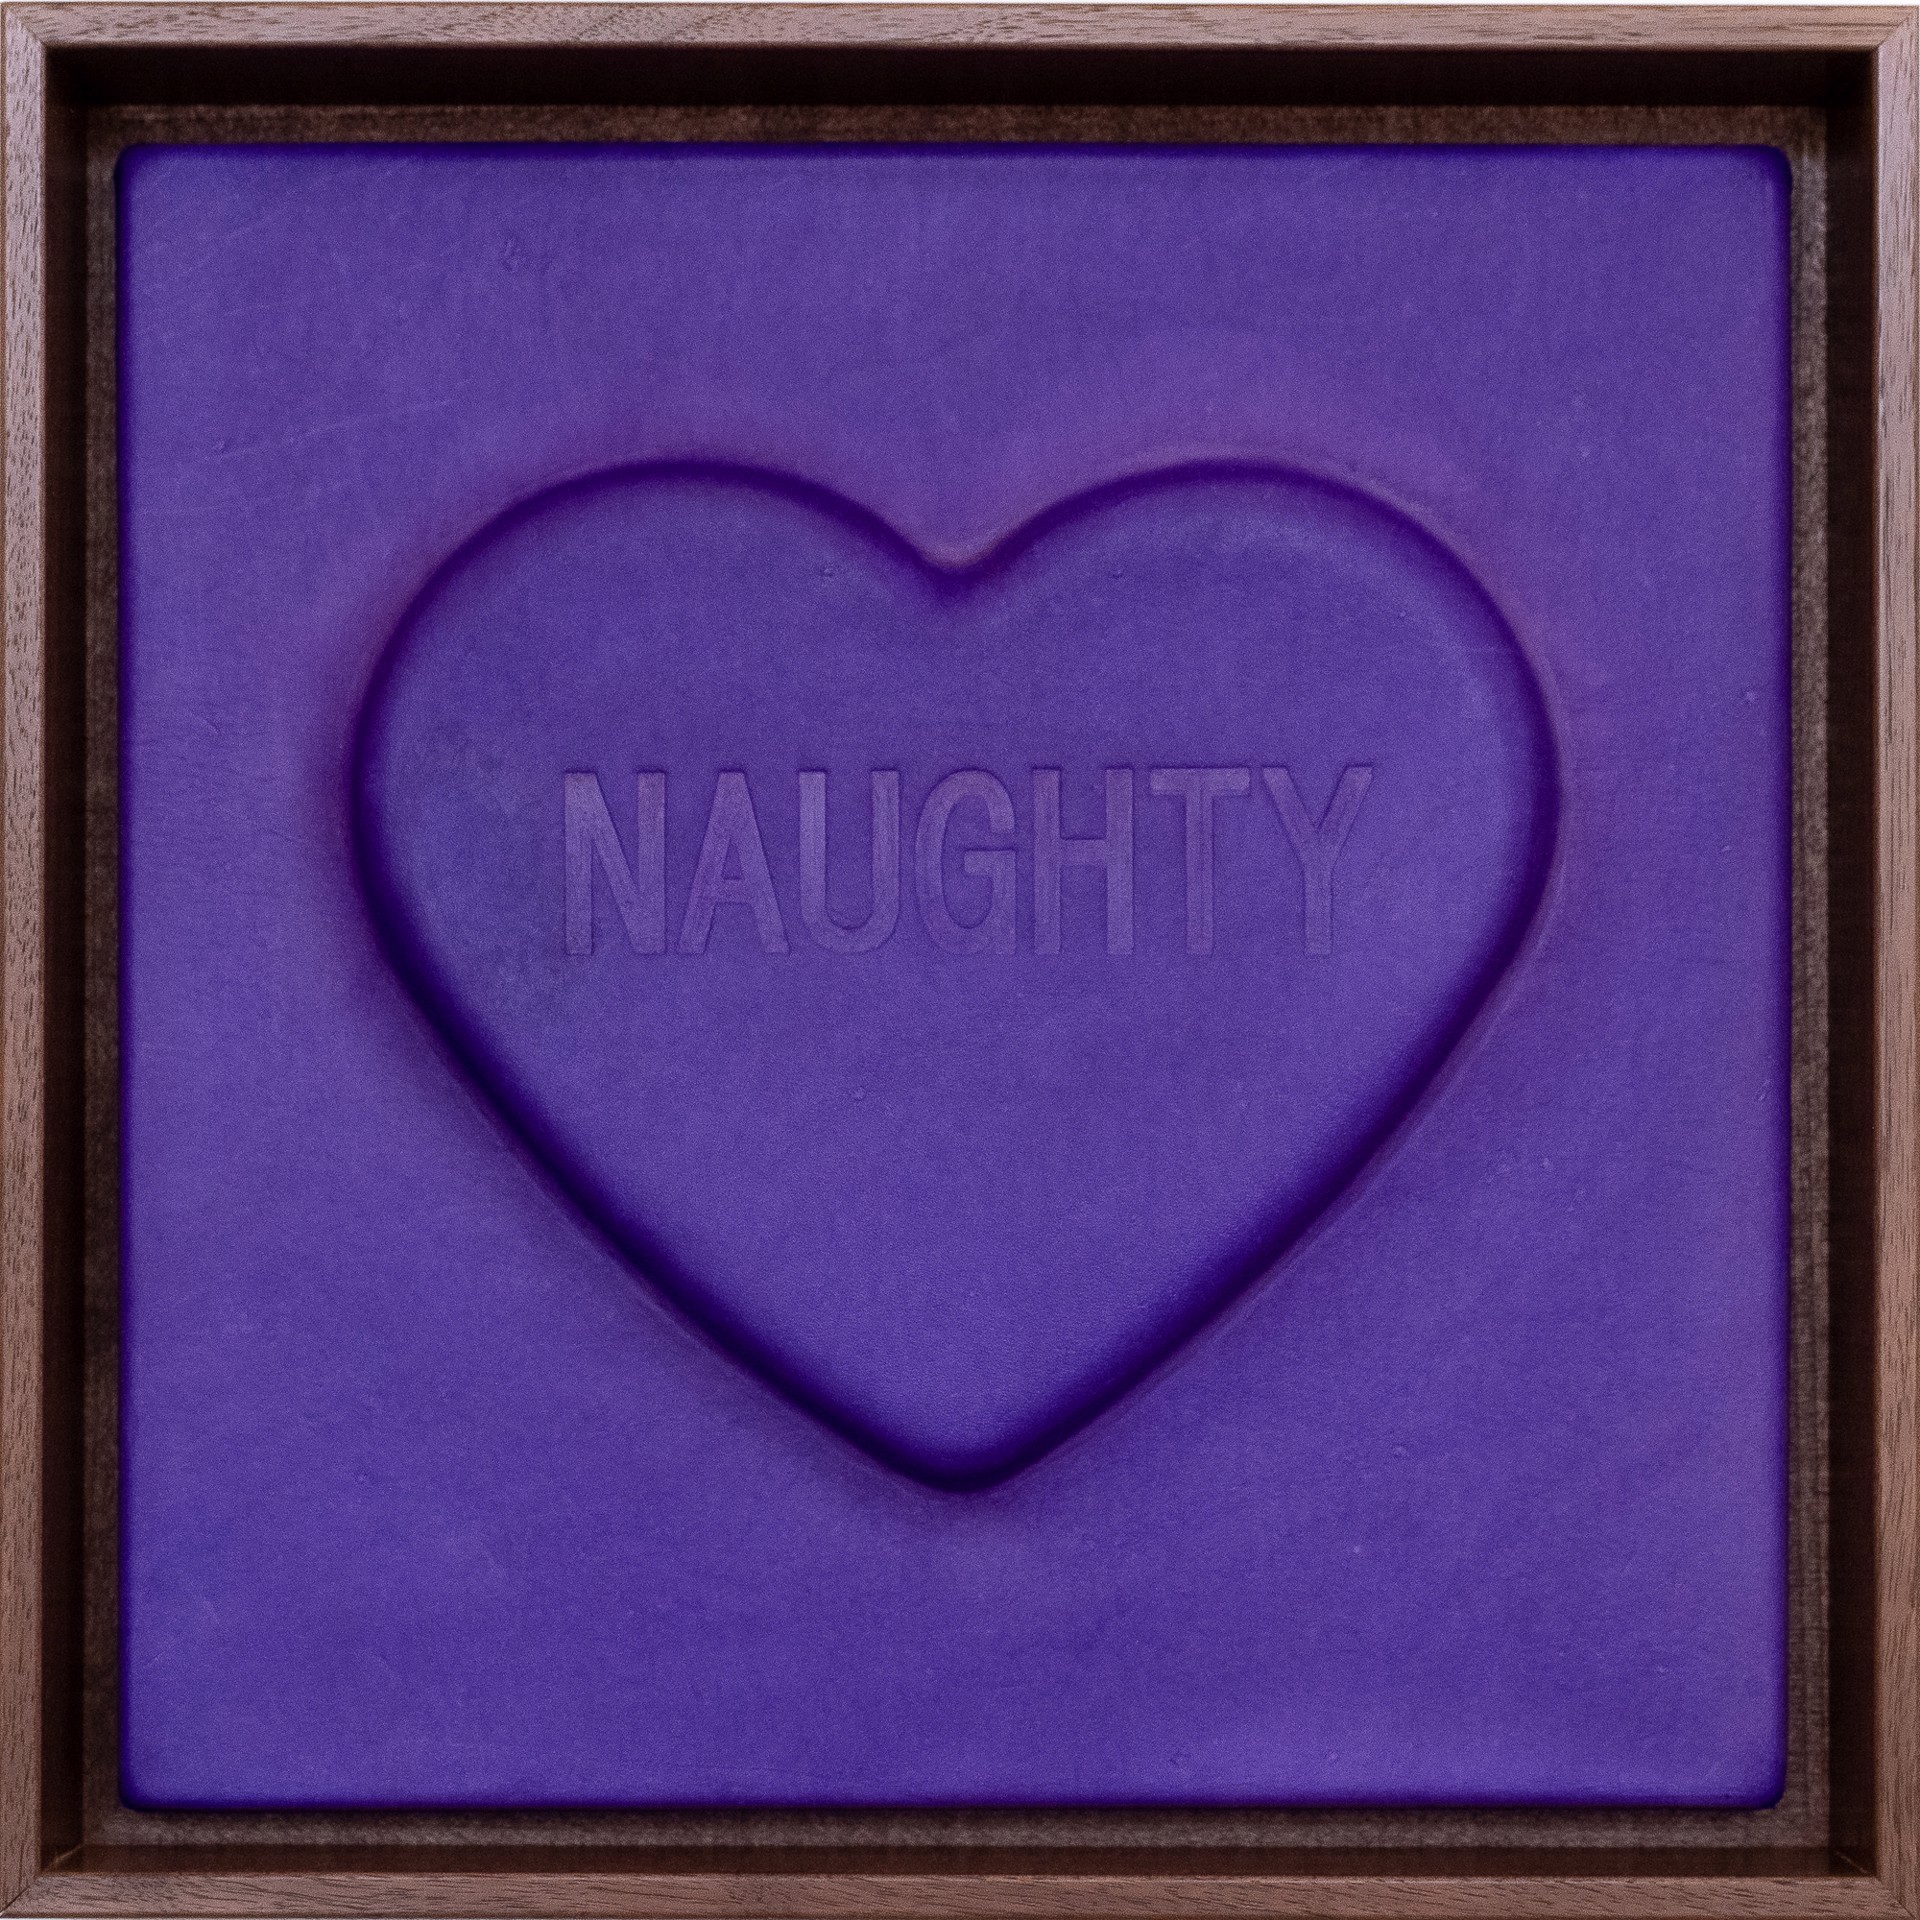 'Naughty' - Sweetheart series by Mx. Hyde